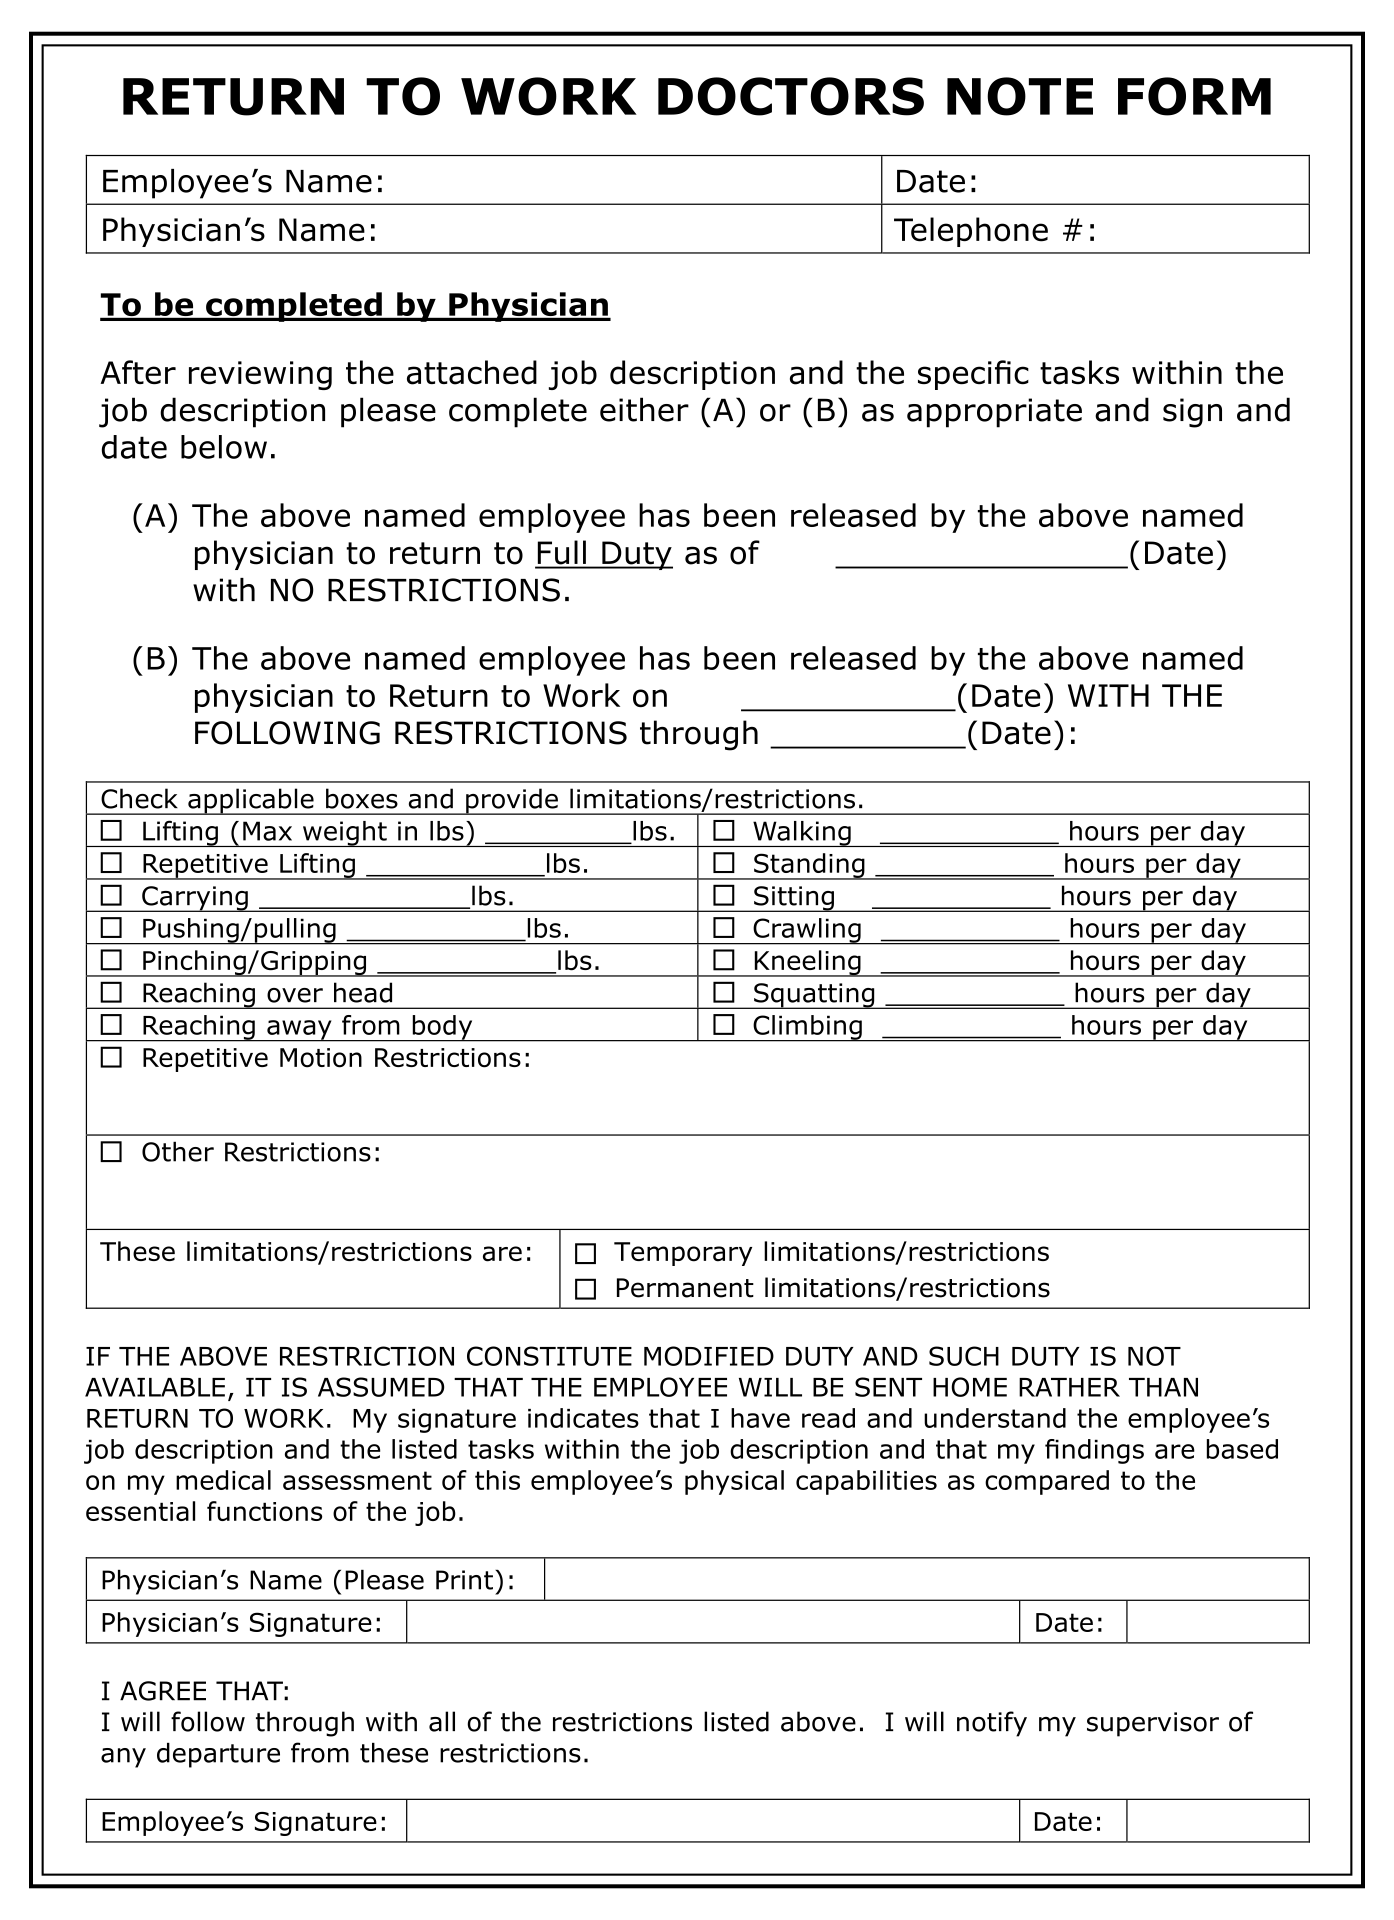 Return To Work Doctors Note Template Free